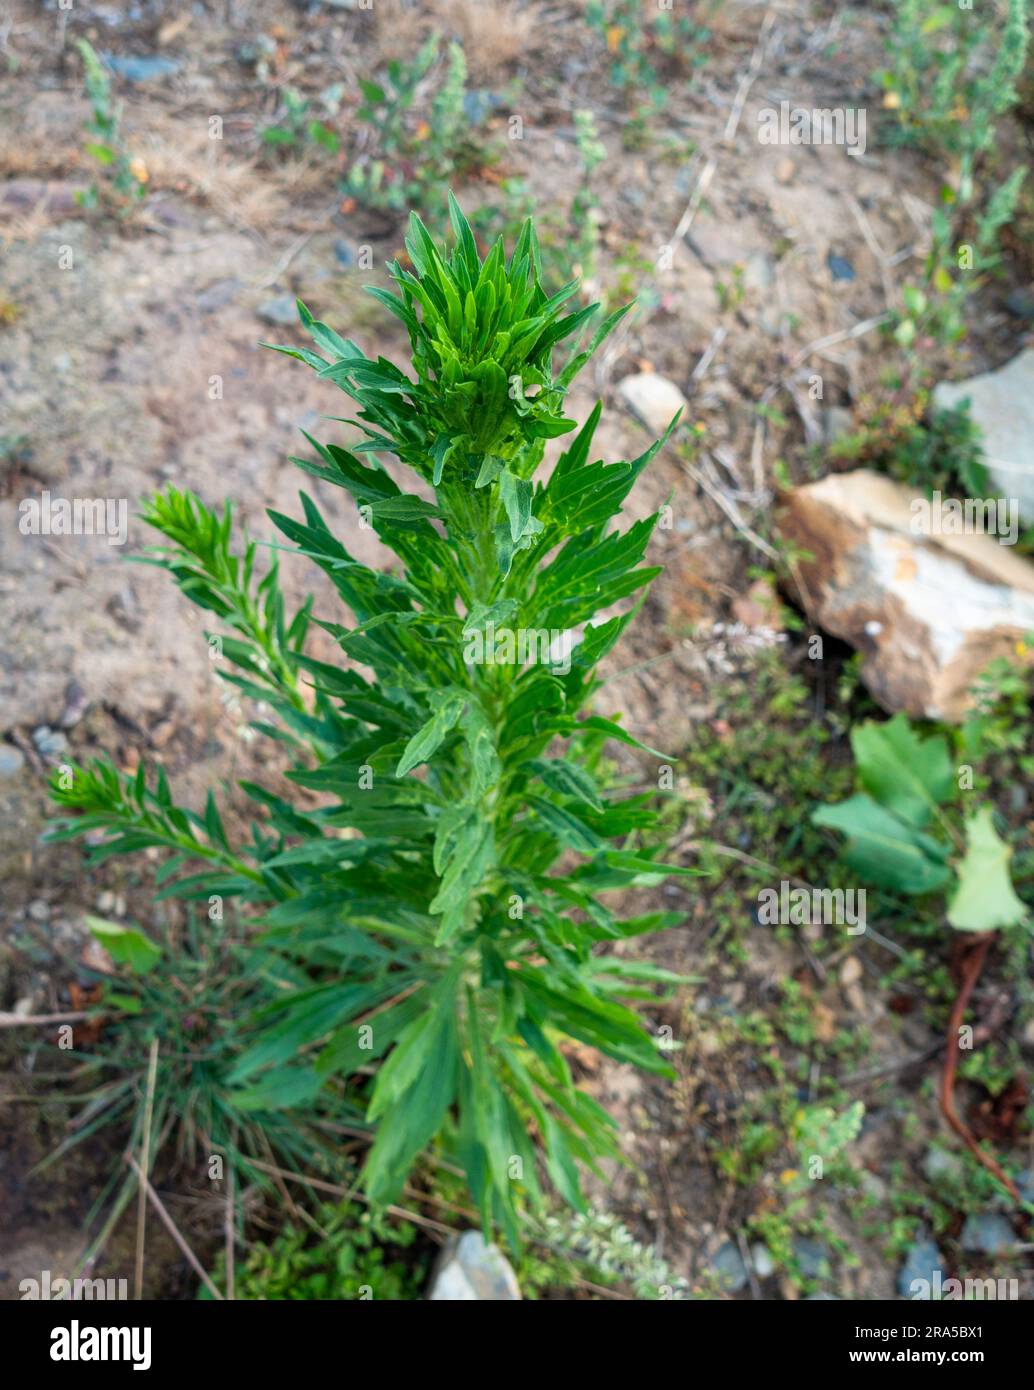 Erigeron canadensis, commonly know as horseweed plant. Himalayan region of Uttarakhand, India. Stock Photo